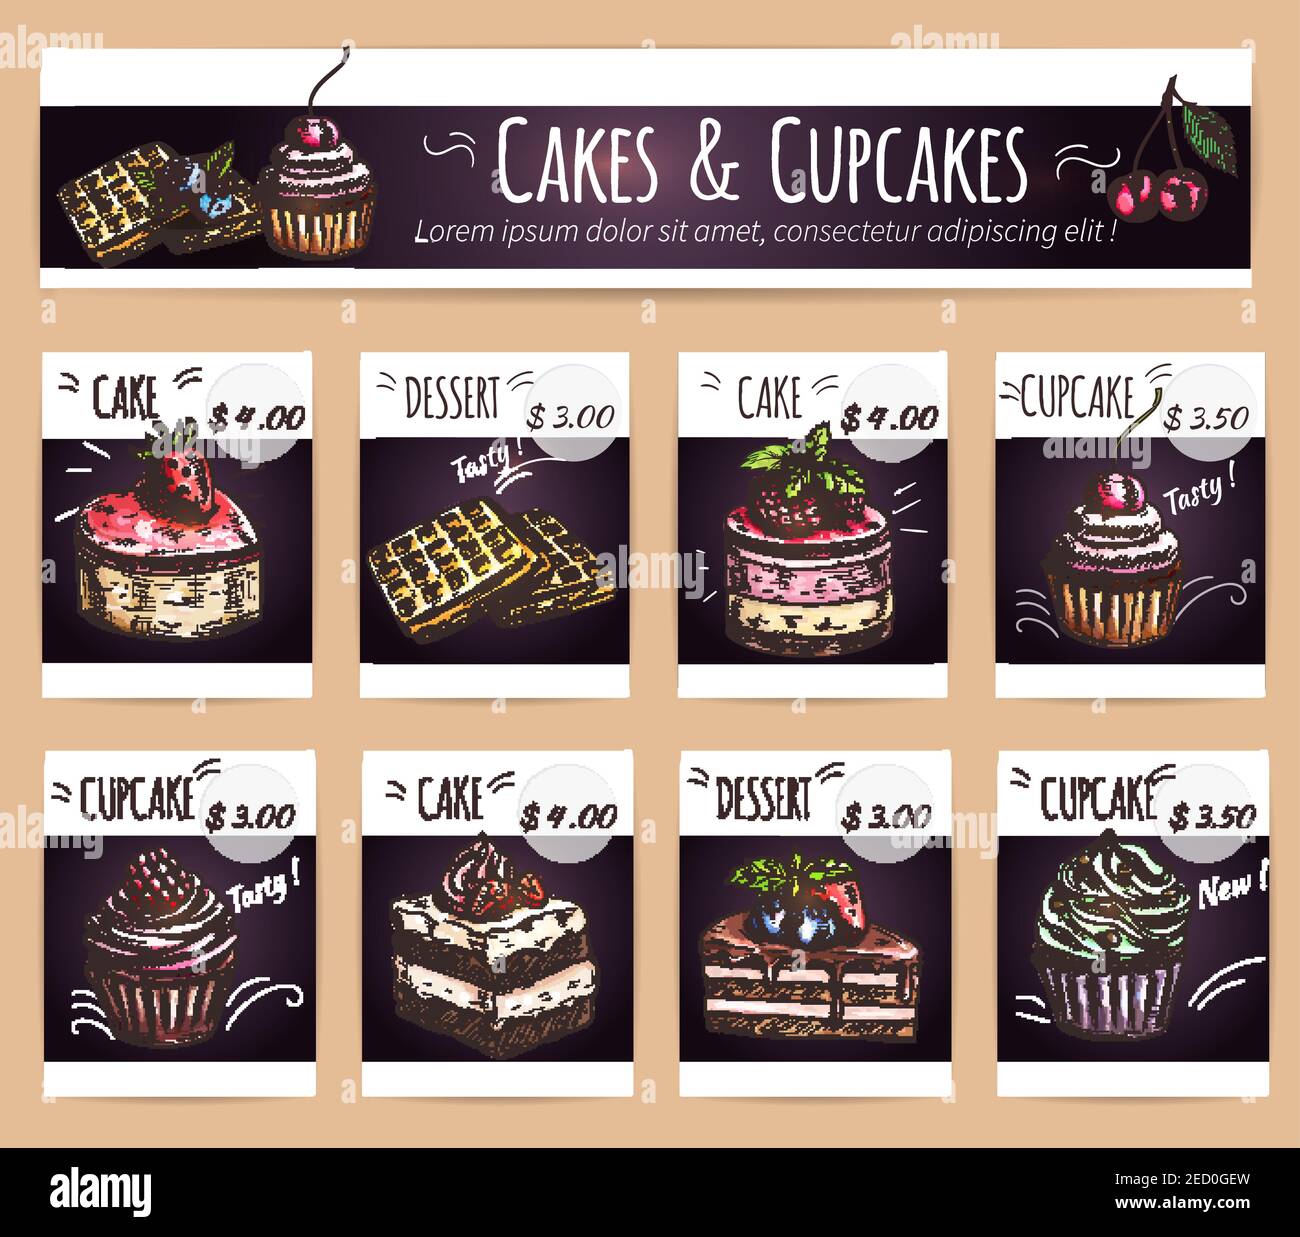 Page 4 - Free and customizable delectable bakery menu templates | Canva